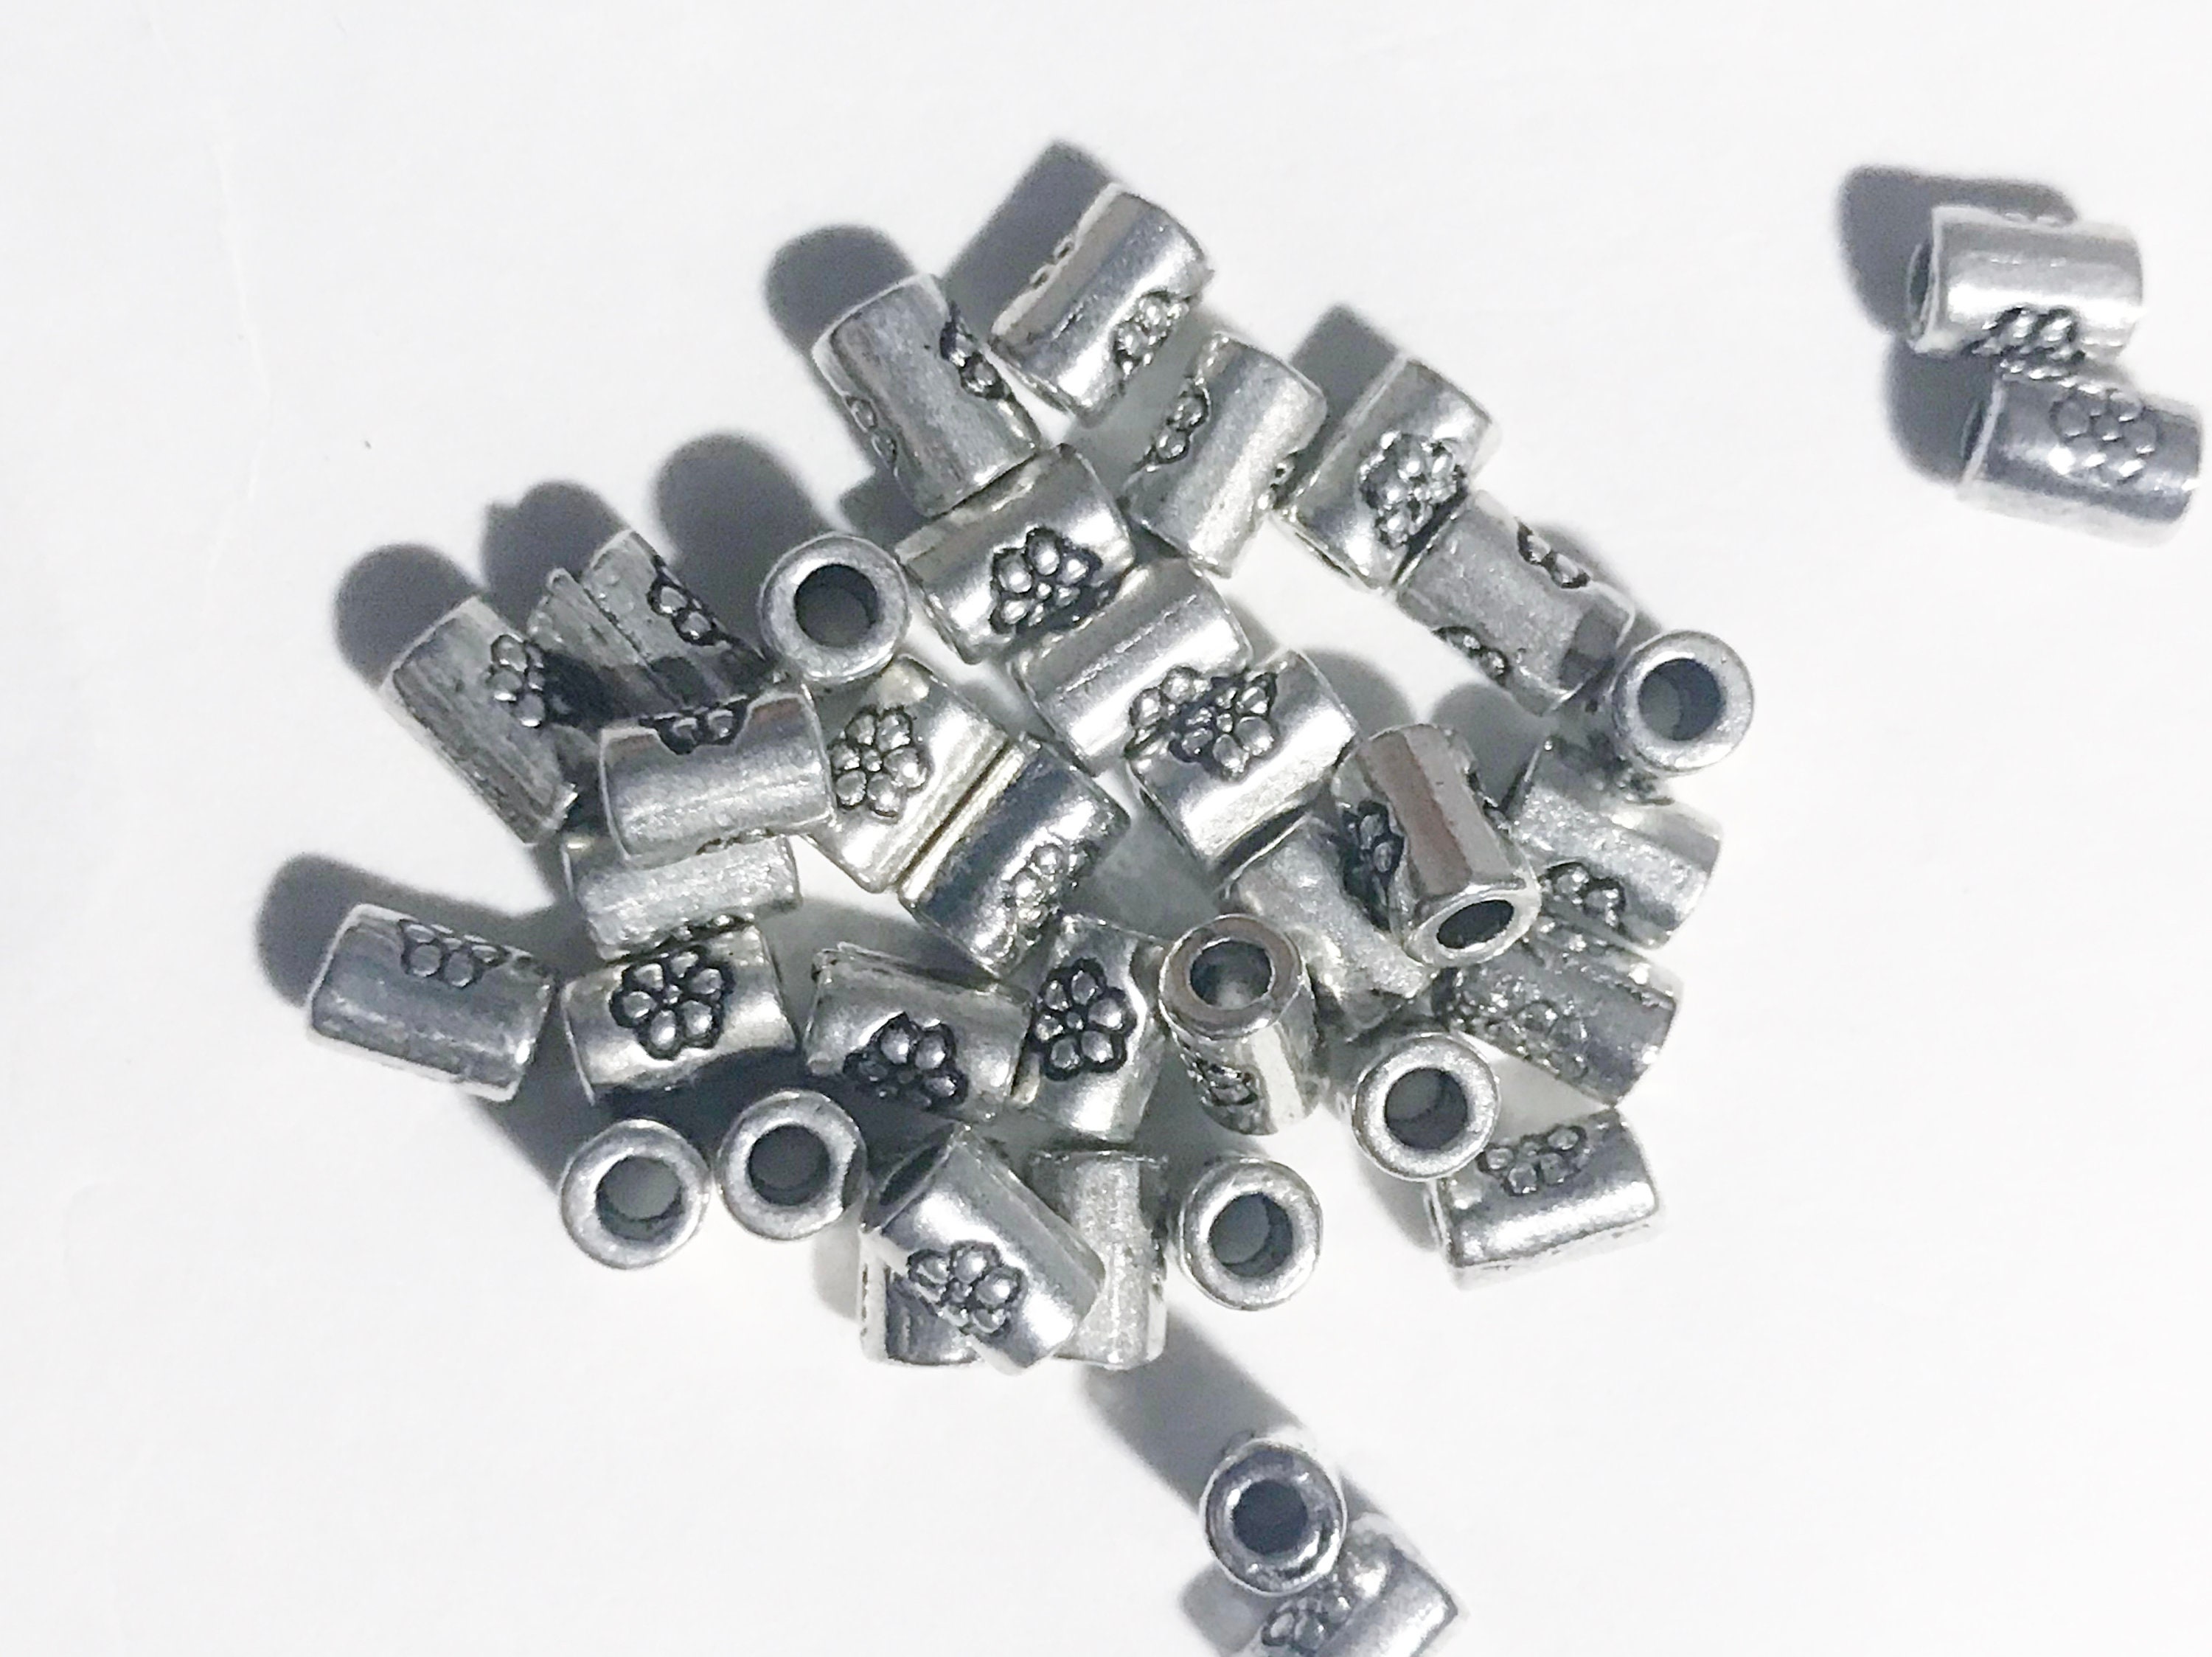 25 Pc Silver Spacer Beads, Round Rimmed Beads, Silver Plated Beads, Tube  Beads, Jewelry Spacers, Bead Spacers, Spacer Beads, Tibetan Jewelry 